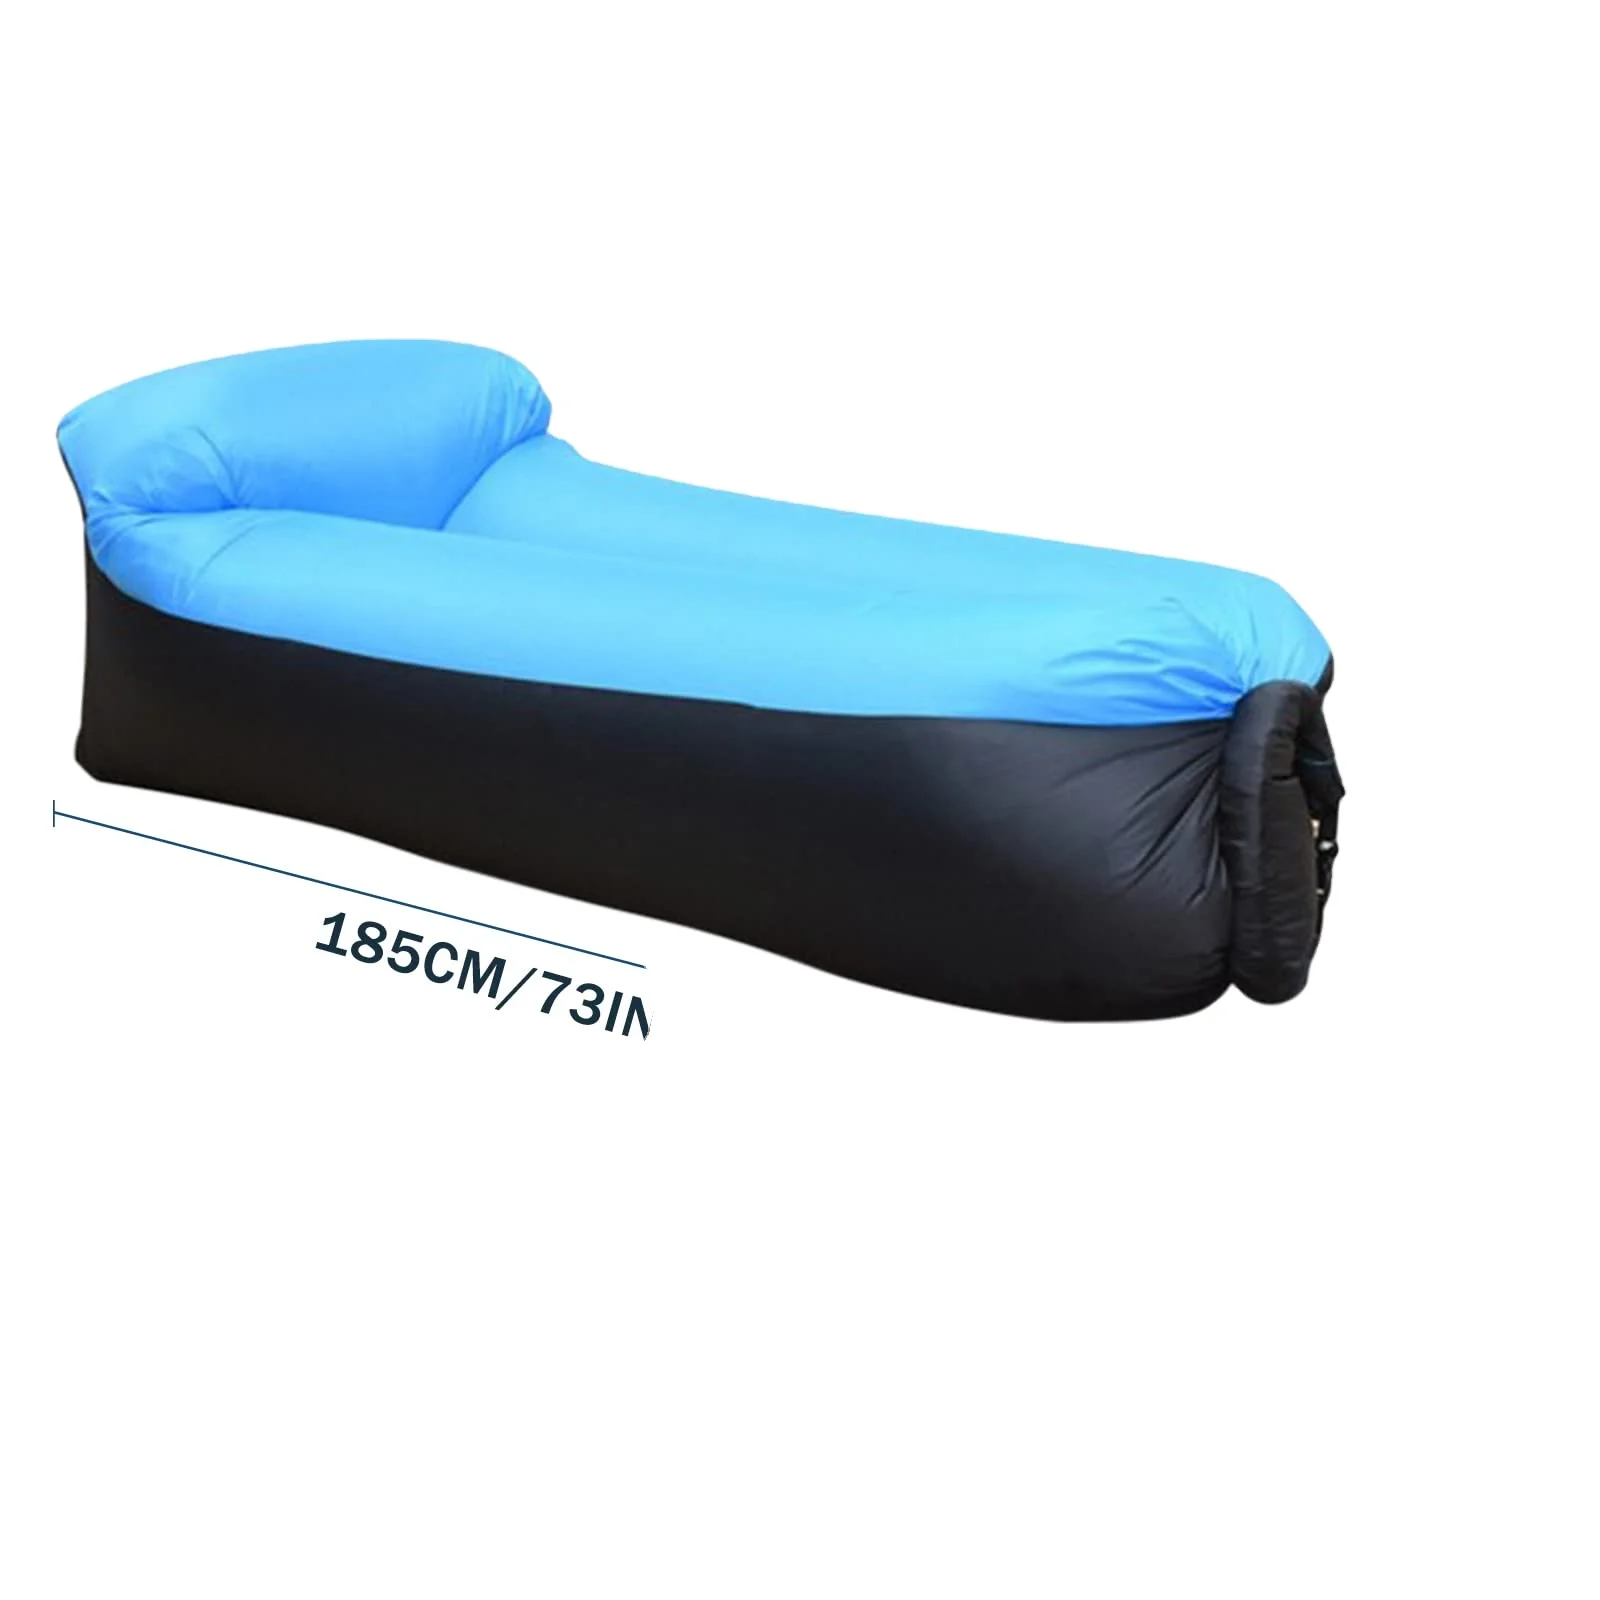 

Lounger Airsofa Laybag Waterproof Anti-Air Leaking DesignInflatable Beach Chair for Camping Hiking